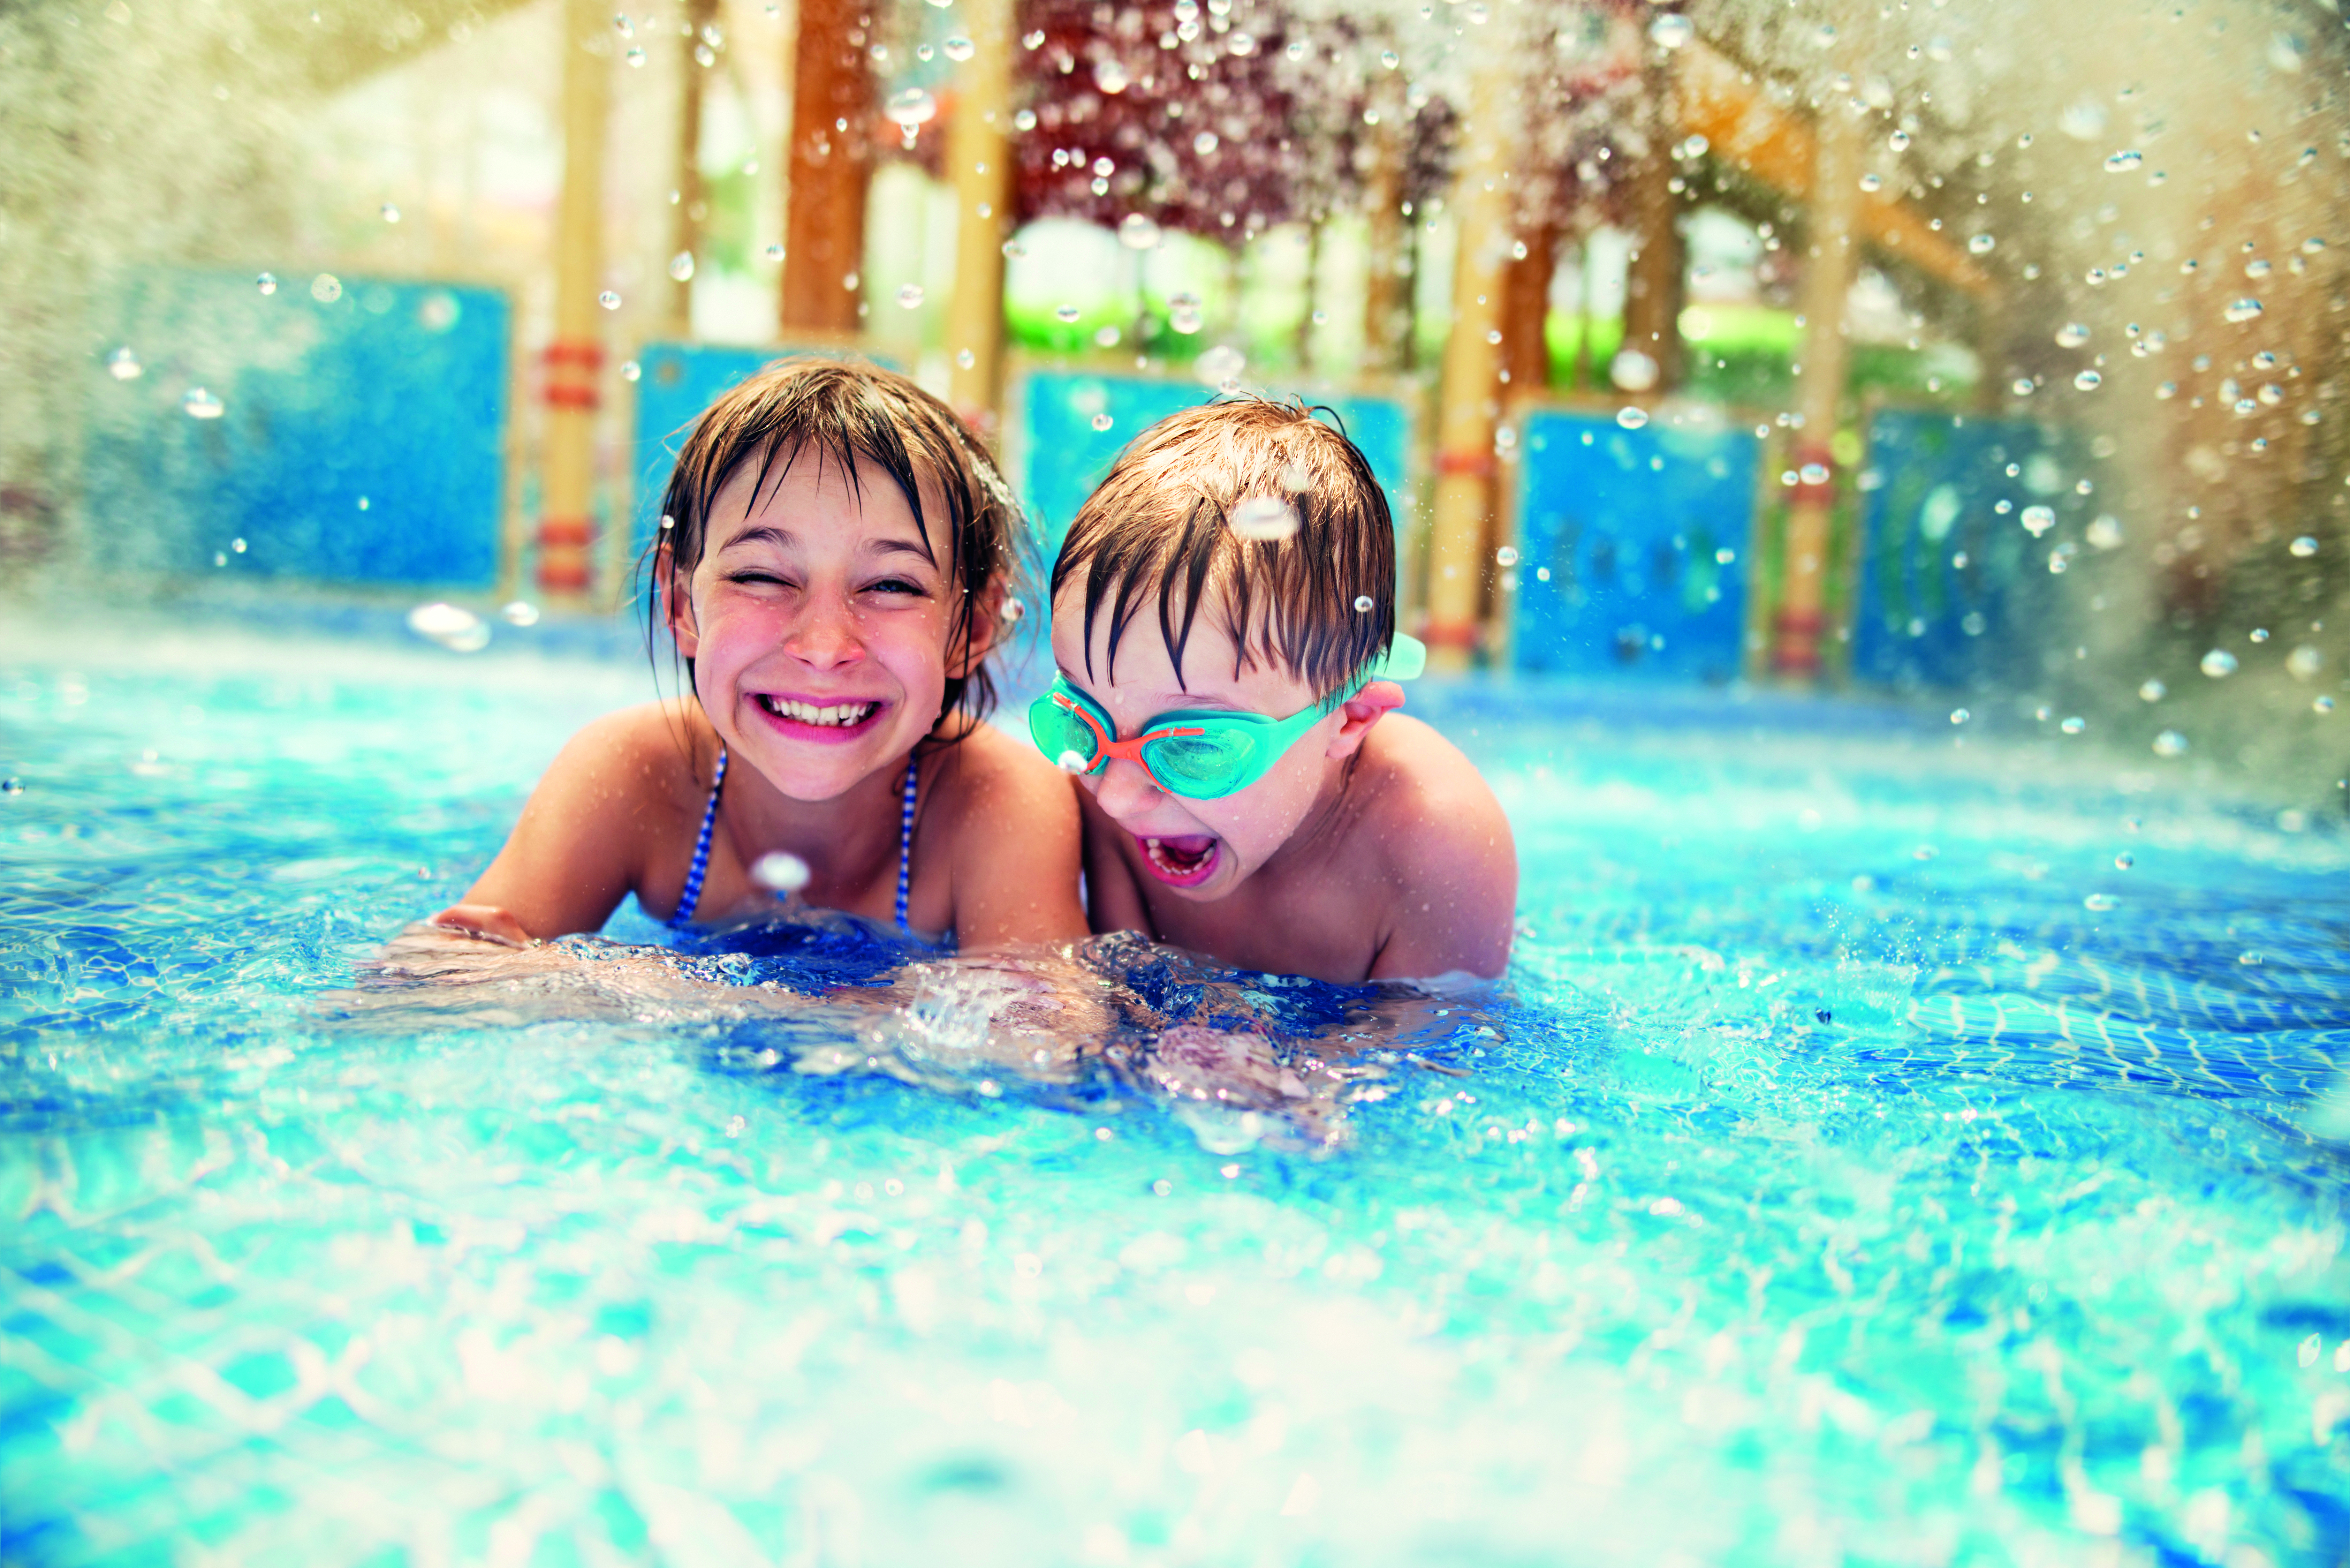 Swimming is a great way to enjoy the summer sun, but how do your teeth feel about it? Learn about the effects that ocean and pool water can have on your smile.